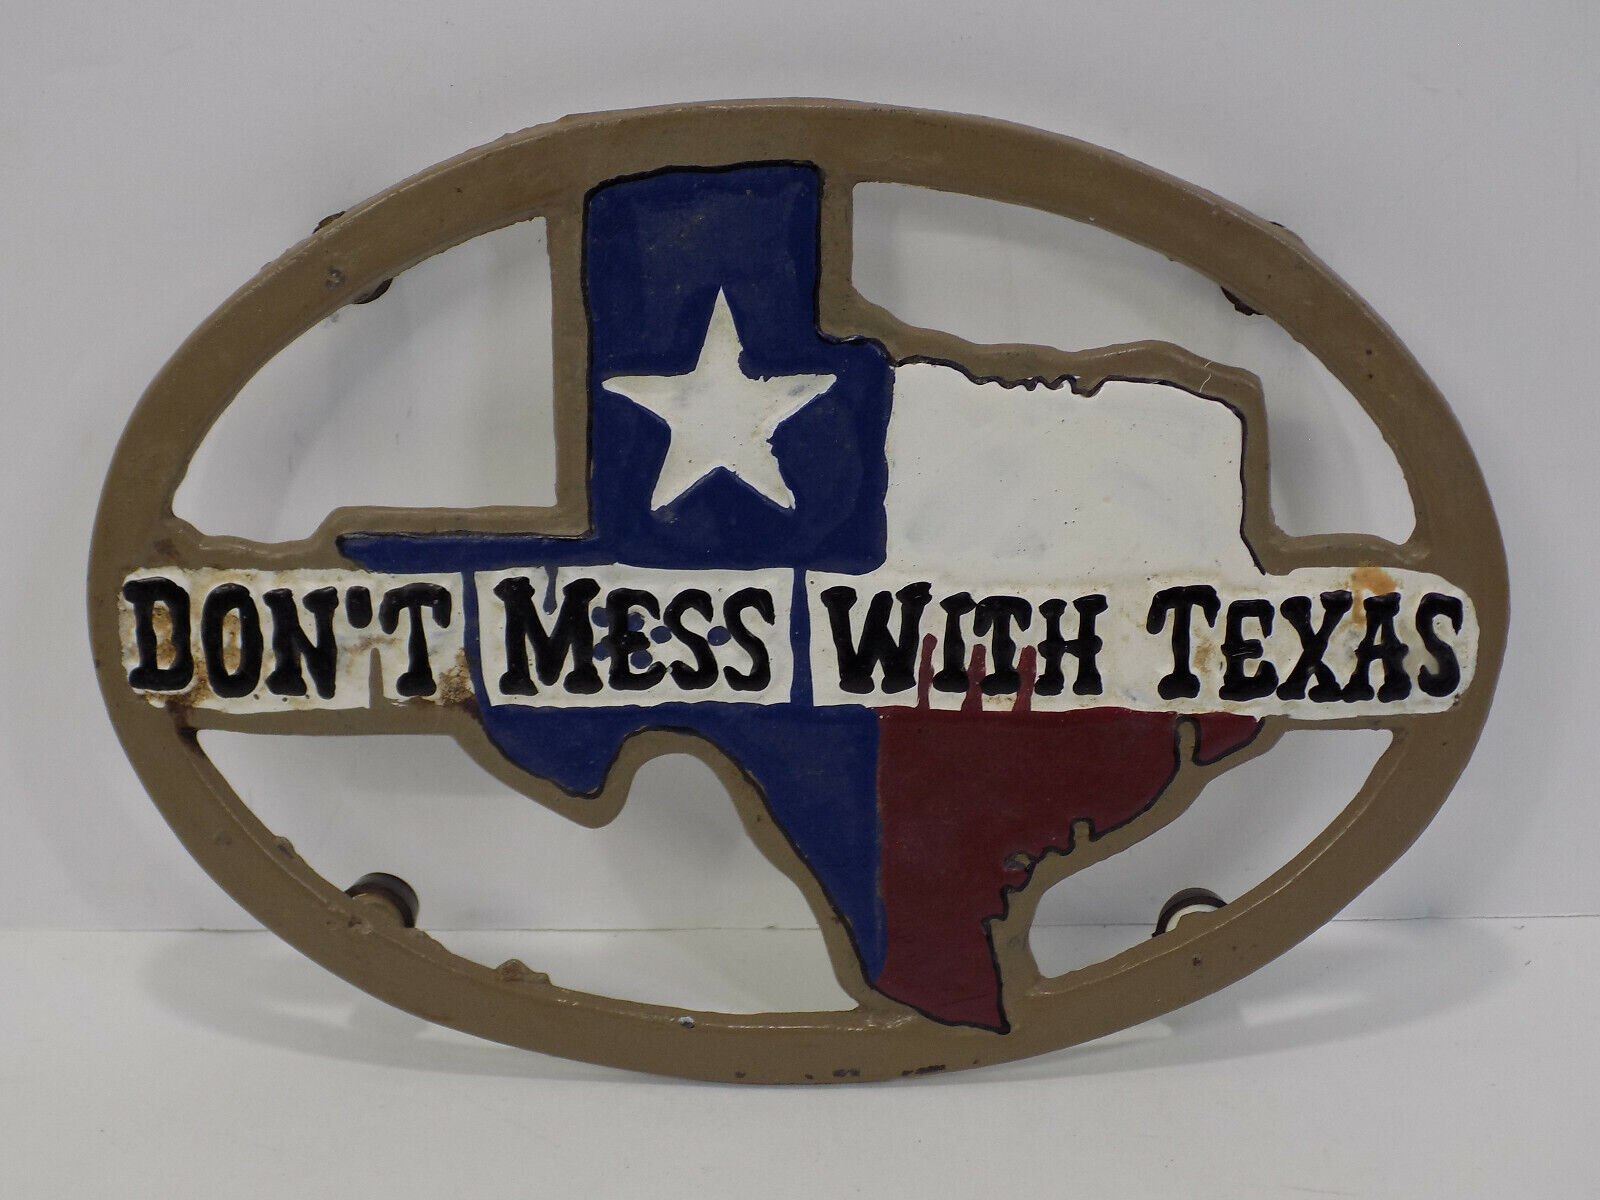 VINTAGE NICE Don\'t Mess With Texas Cast Iron Trivet Oval Hot Pan Rest